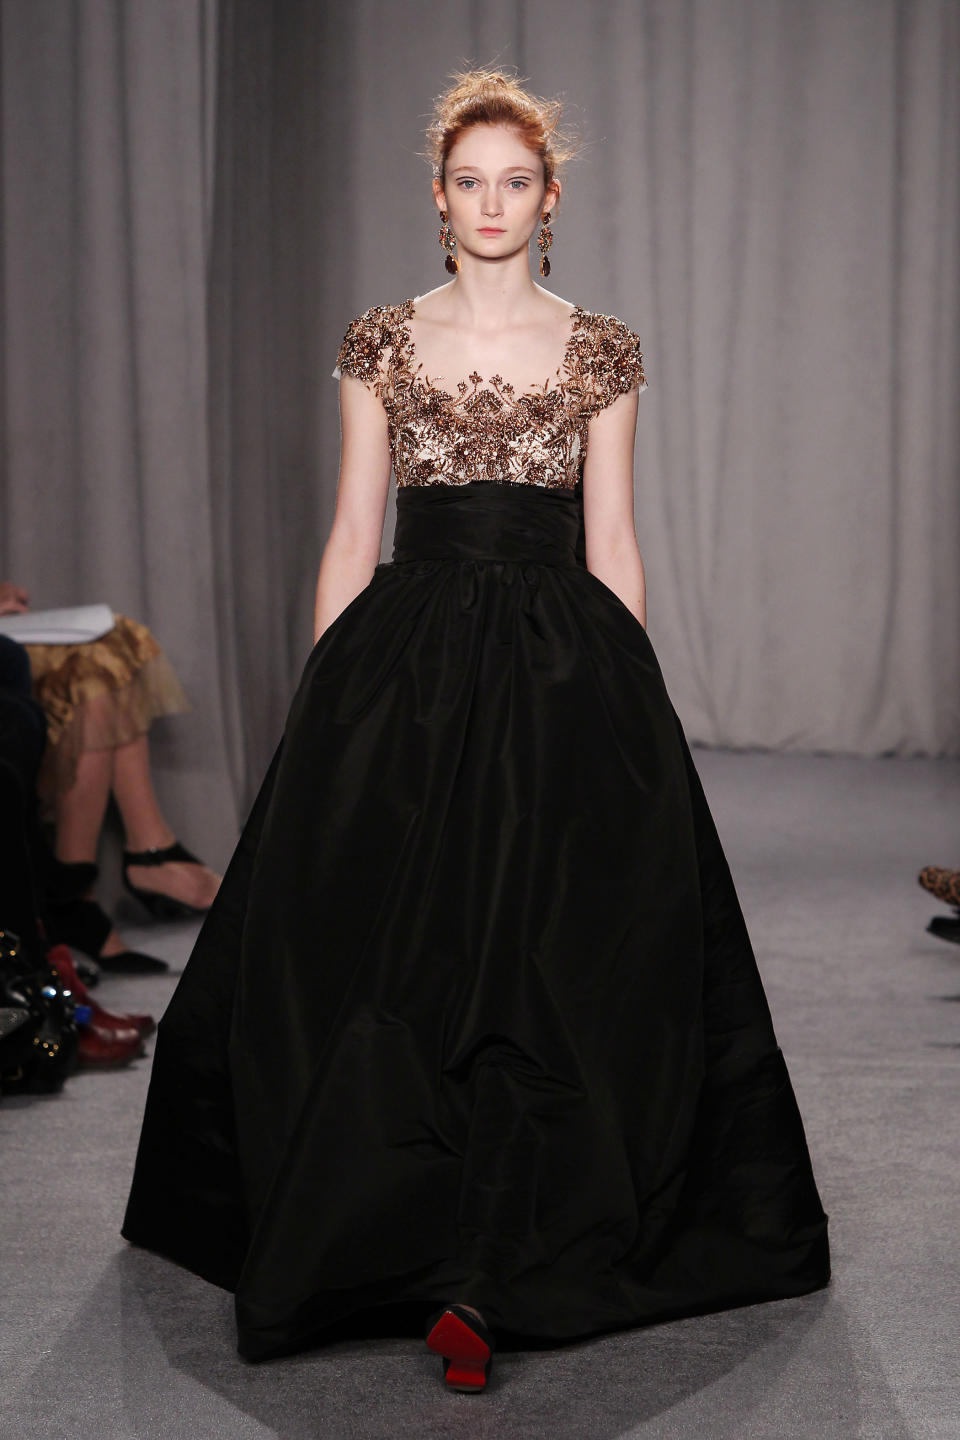 This image released by Starpix shows an outfit from the Marchesa Fall 2014 collection during Fashion Week in New York, Wednesday, Feb. 12, 2014. (AP Photo/Starpix, Amanda Schwab)